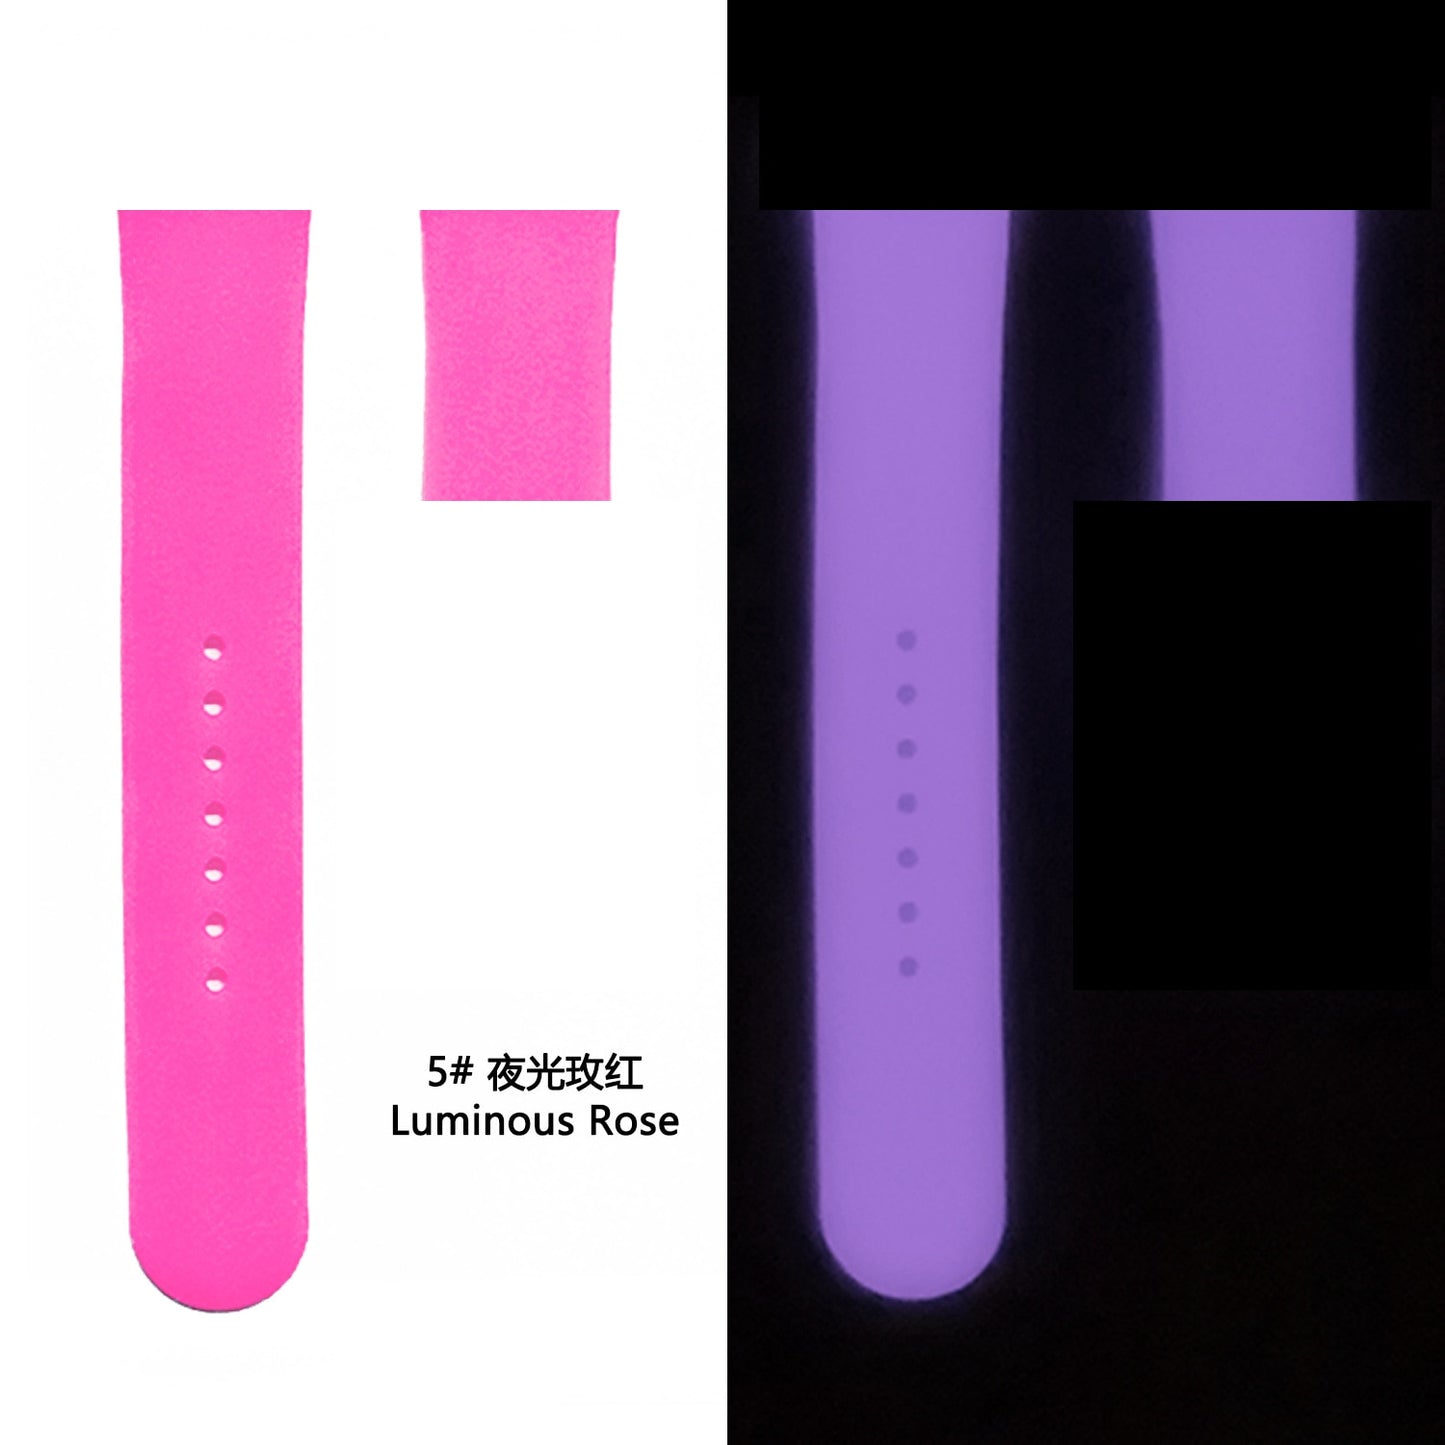 Luminous Silicone Strap For Apple Watch Band Ultra 49mm 8 7 45/41mm Sport Loop Bracelet For Iwatch 6 5 4 Se 44mm 42mm 40mm 38mm - China / luminous rose / 38 40 41mm  SM - United States / luminous rose / 38 40 41mm  SM - China / luminous rose / 38 40 41mm  ML - United States / luminous rose / 38 40 41mm  ML - China / luminous rose / 42 44 45 49mm  SM - United States / luminous rose / 42 44 45 49mm  SM - China / luminous rose / 42 44 45 49mm  ML - United States / luminous rose / 42 44 45 49mm  ML